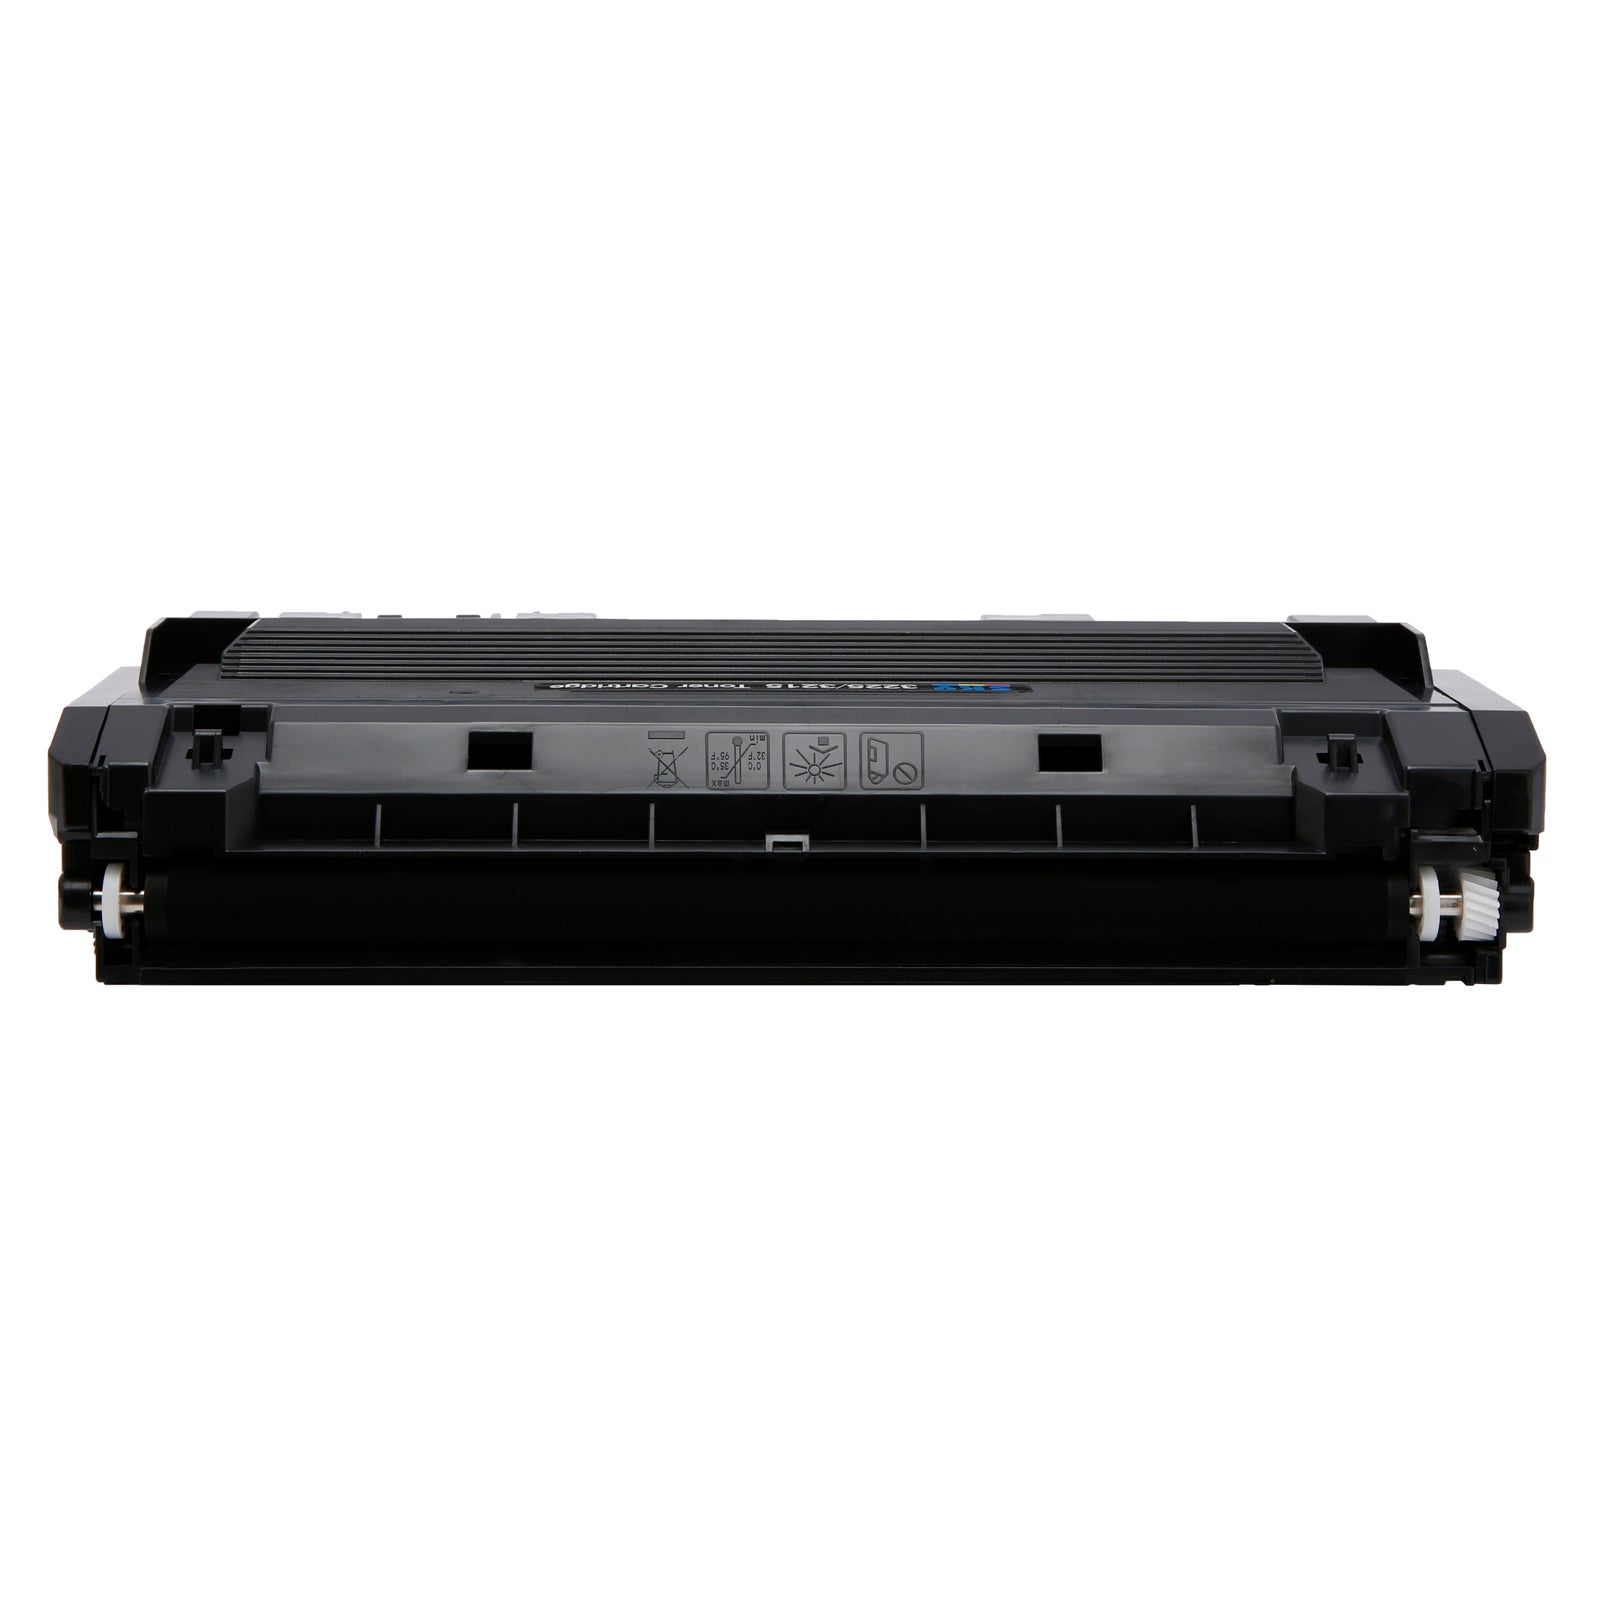 SKY   Toner Cartridge for Xerox Phaser 3260, 3052 and Wokcentre 3215, 3225